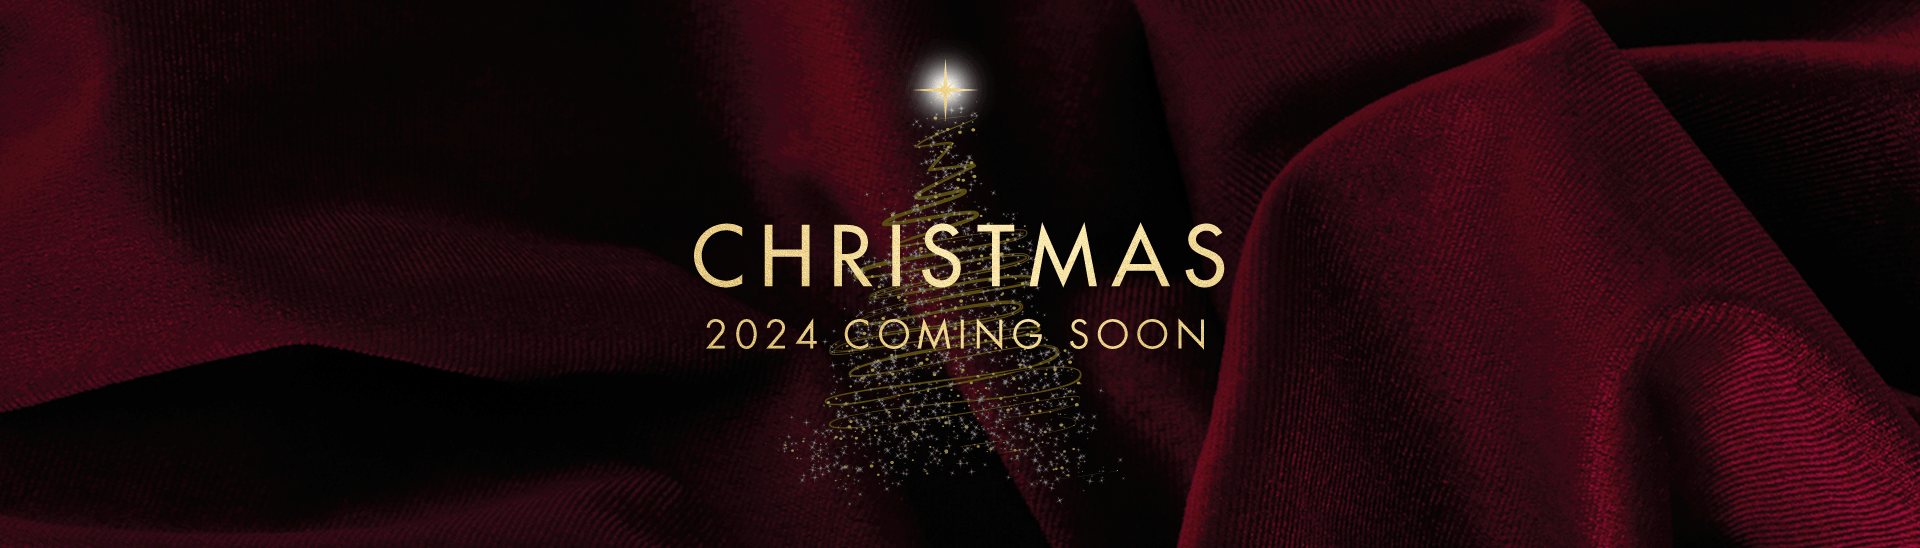 Christmas 2024 at Leicester